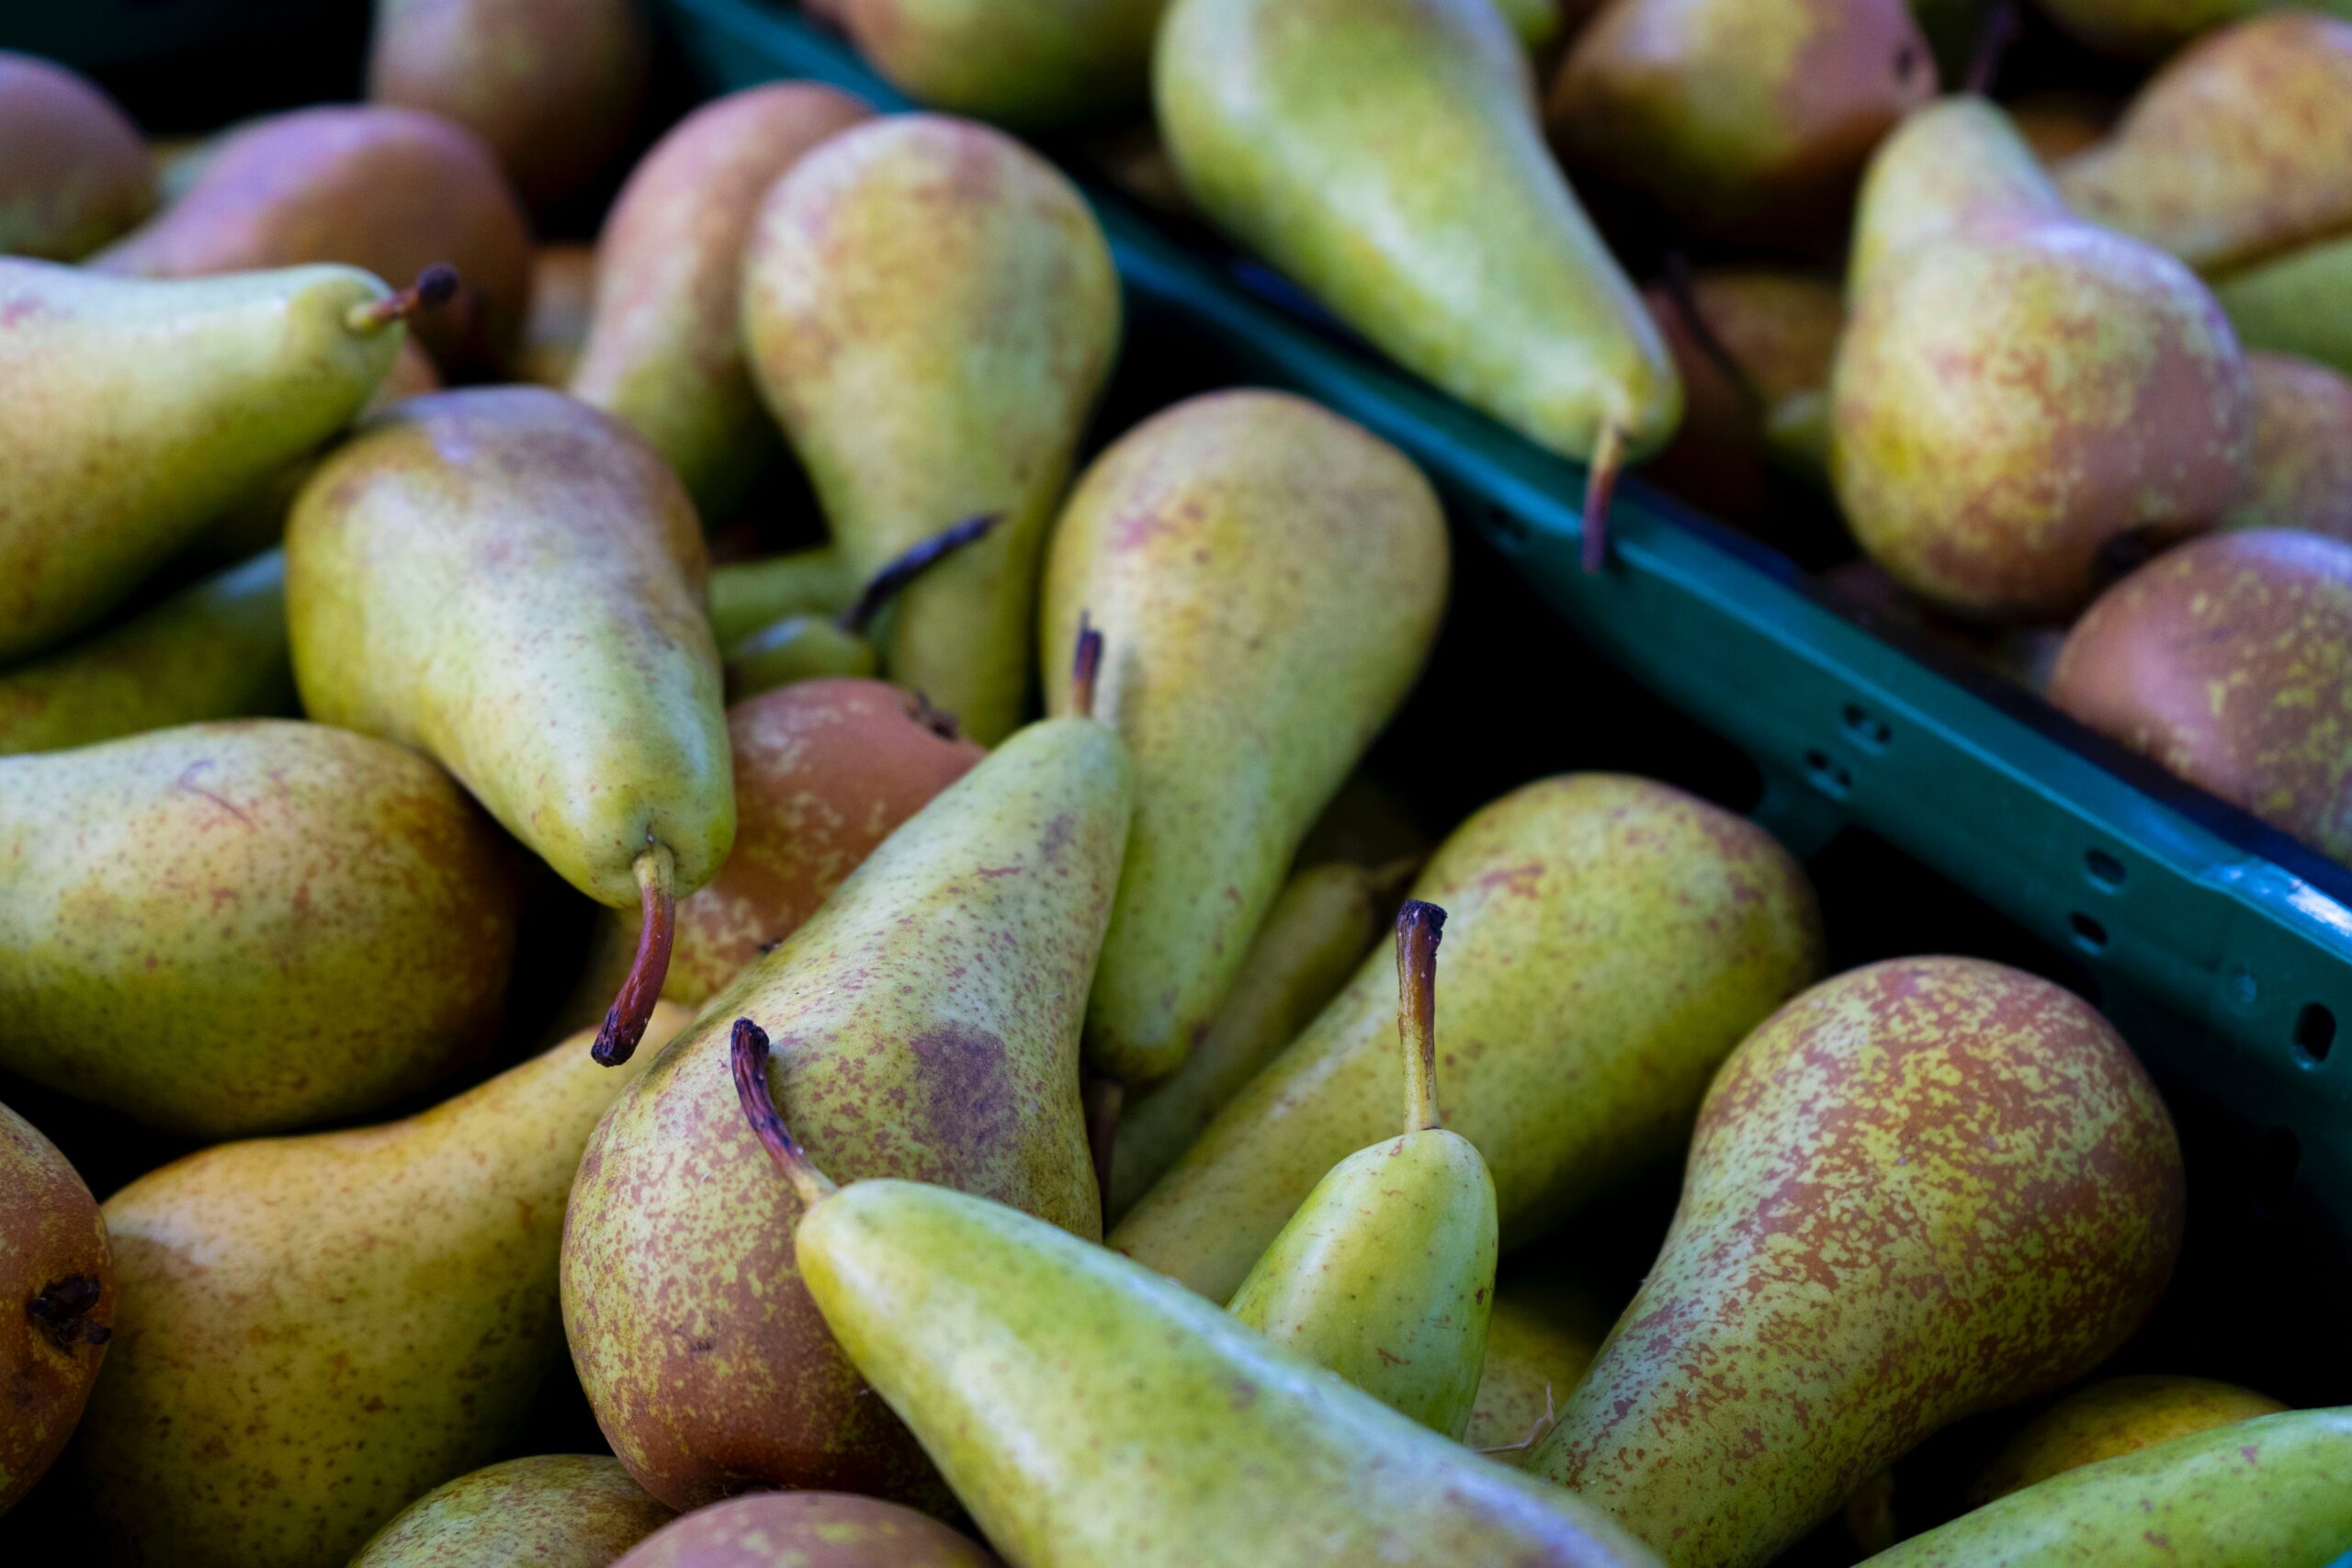 pears in a box